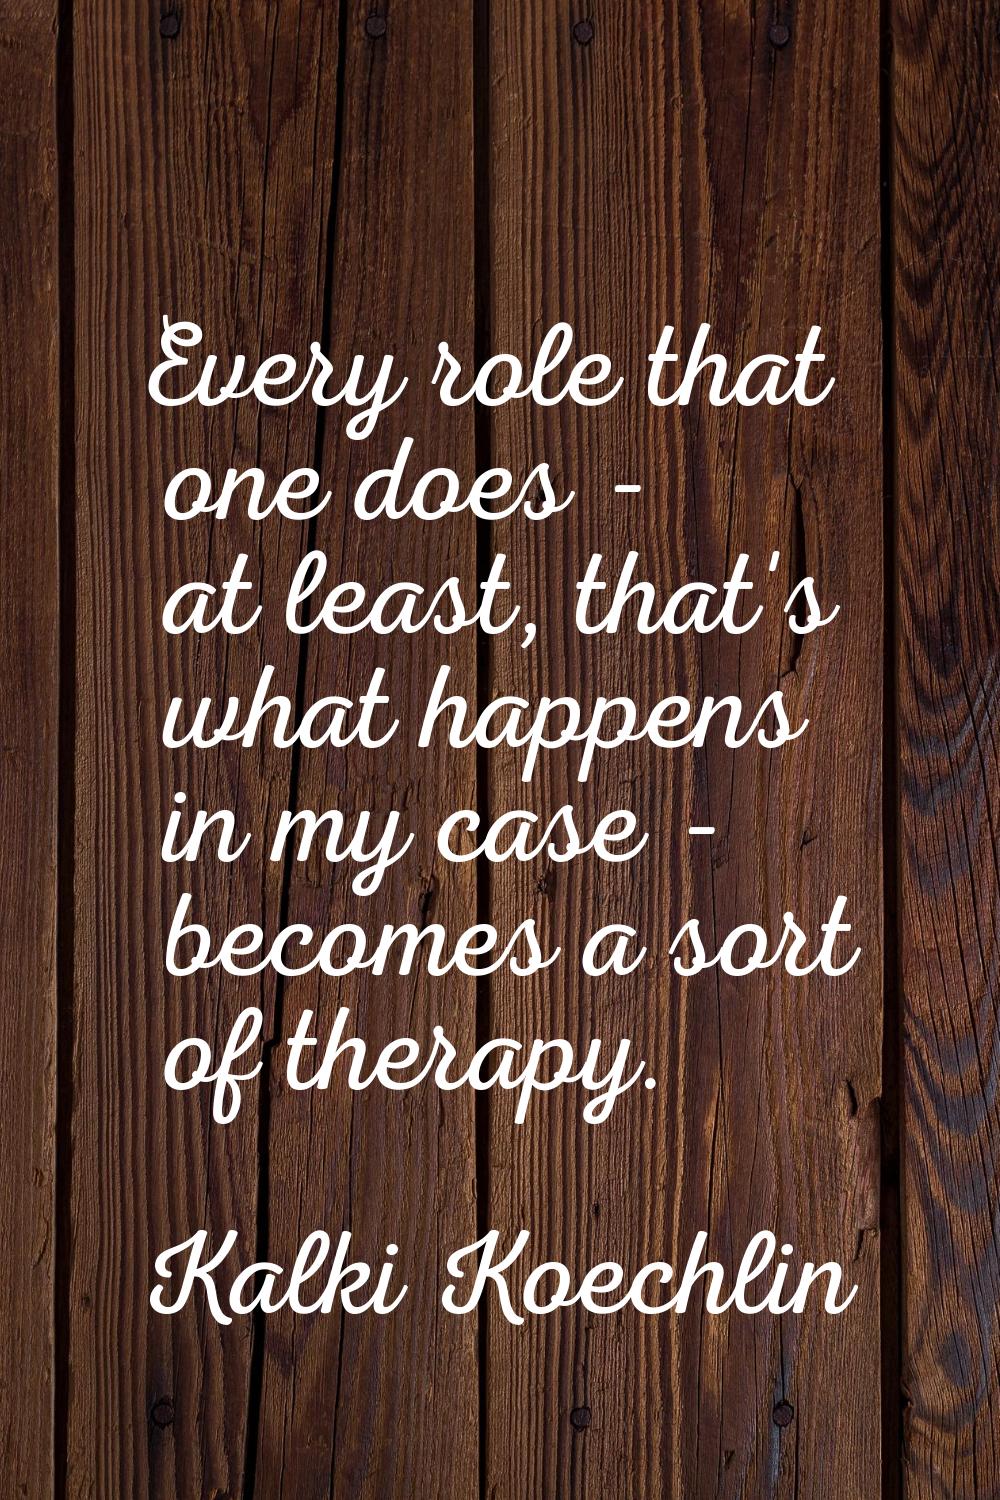 Every role that one does - at least, that's what happens in my case - becomes a sort of therapy.